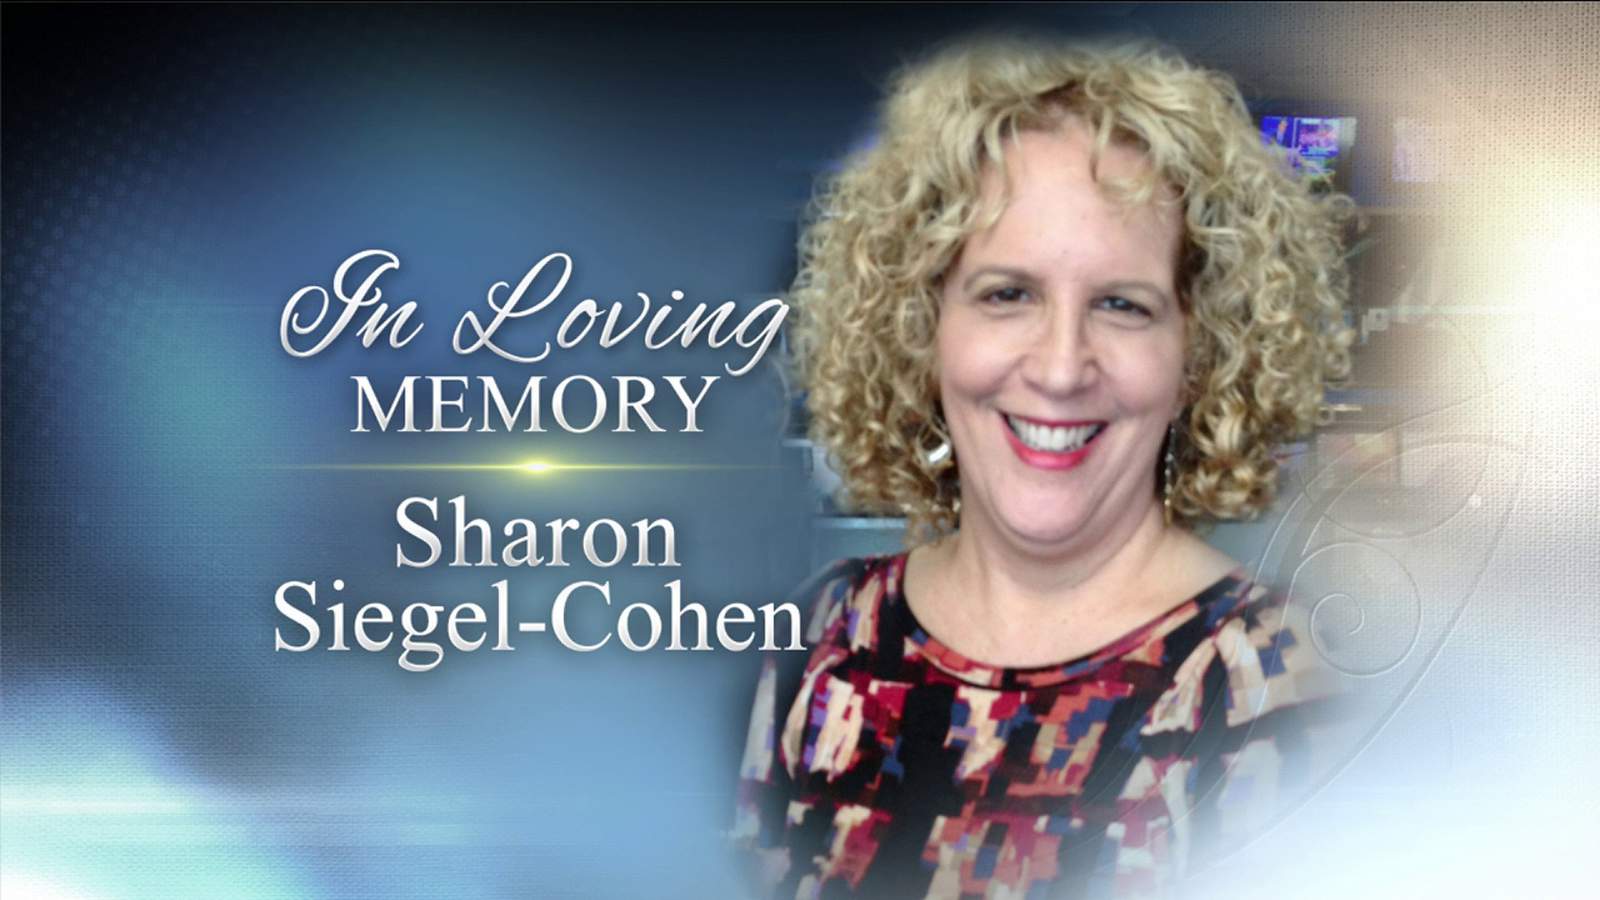 Sharon Siegel-Cohen: How one woman meant so much to so many